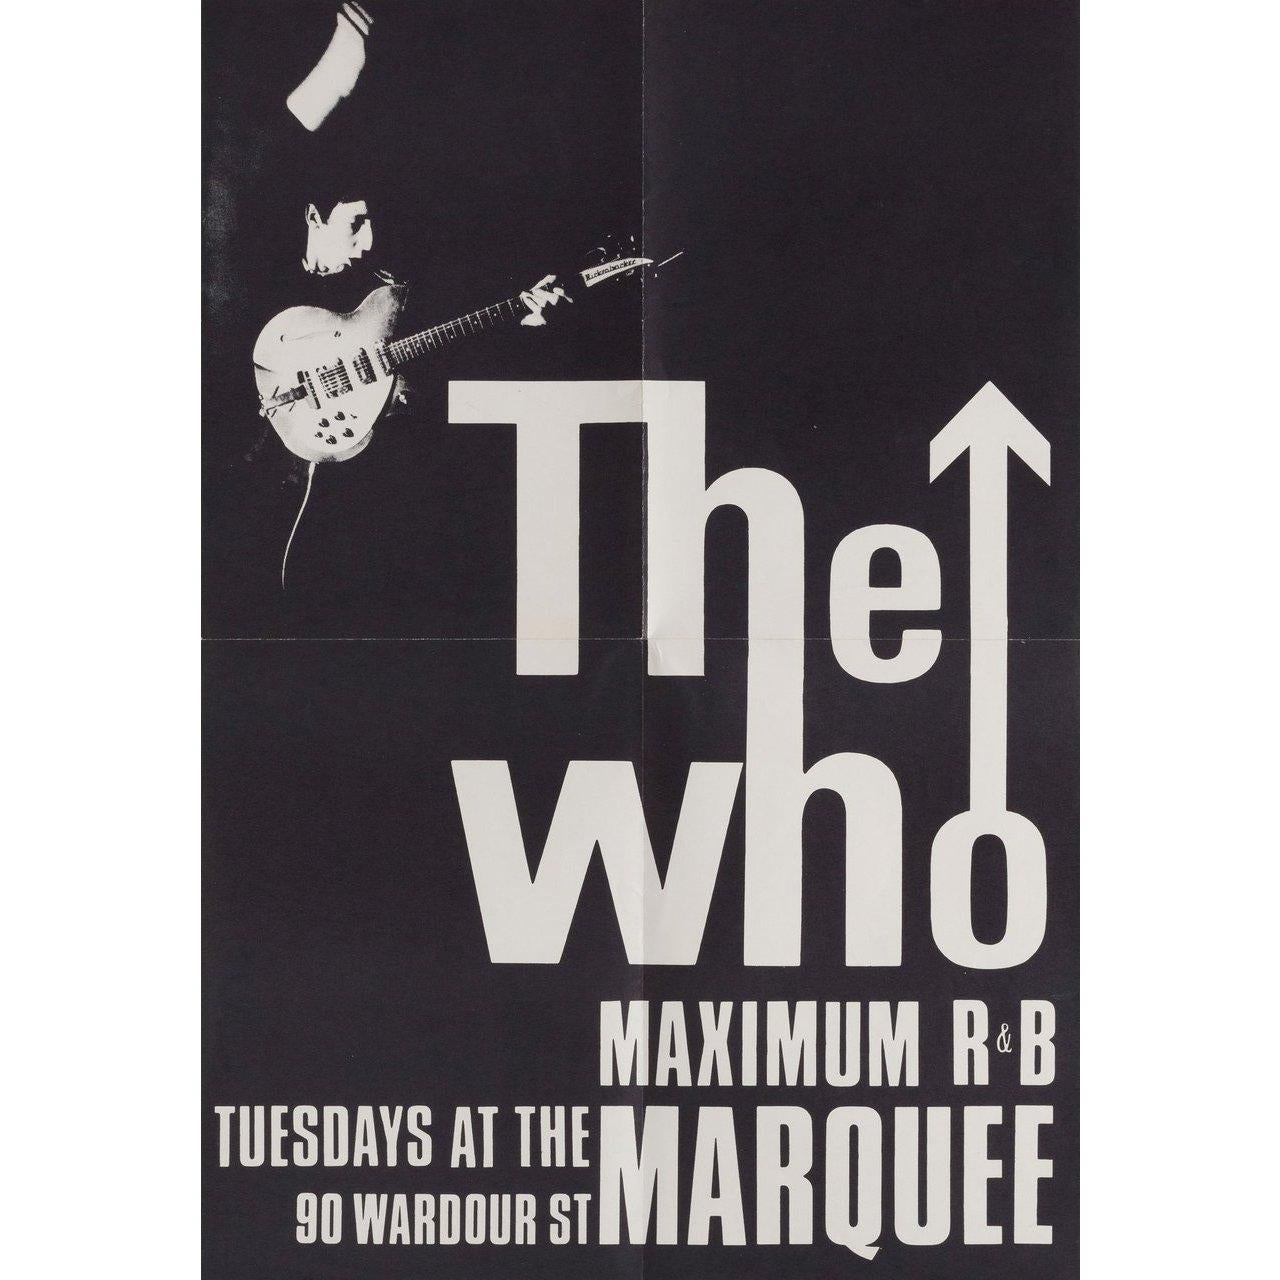 Original 1970s British mini poster for The Who: Maximum R&B (1970s). Very Good-Fine condition, folded. Many original posters were issued folded or were subsequently folded. Please note: the size is stated in inches and the actual size can vary by an